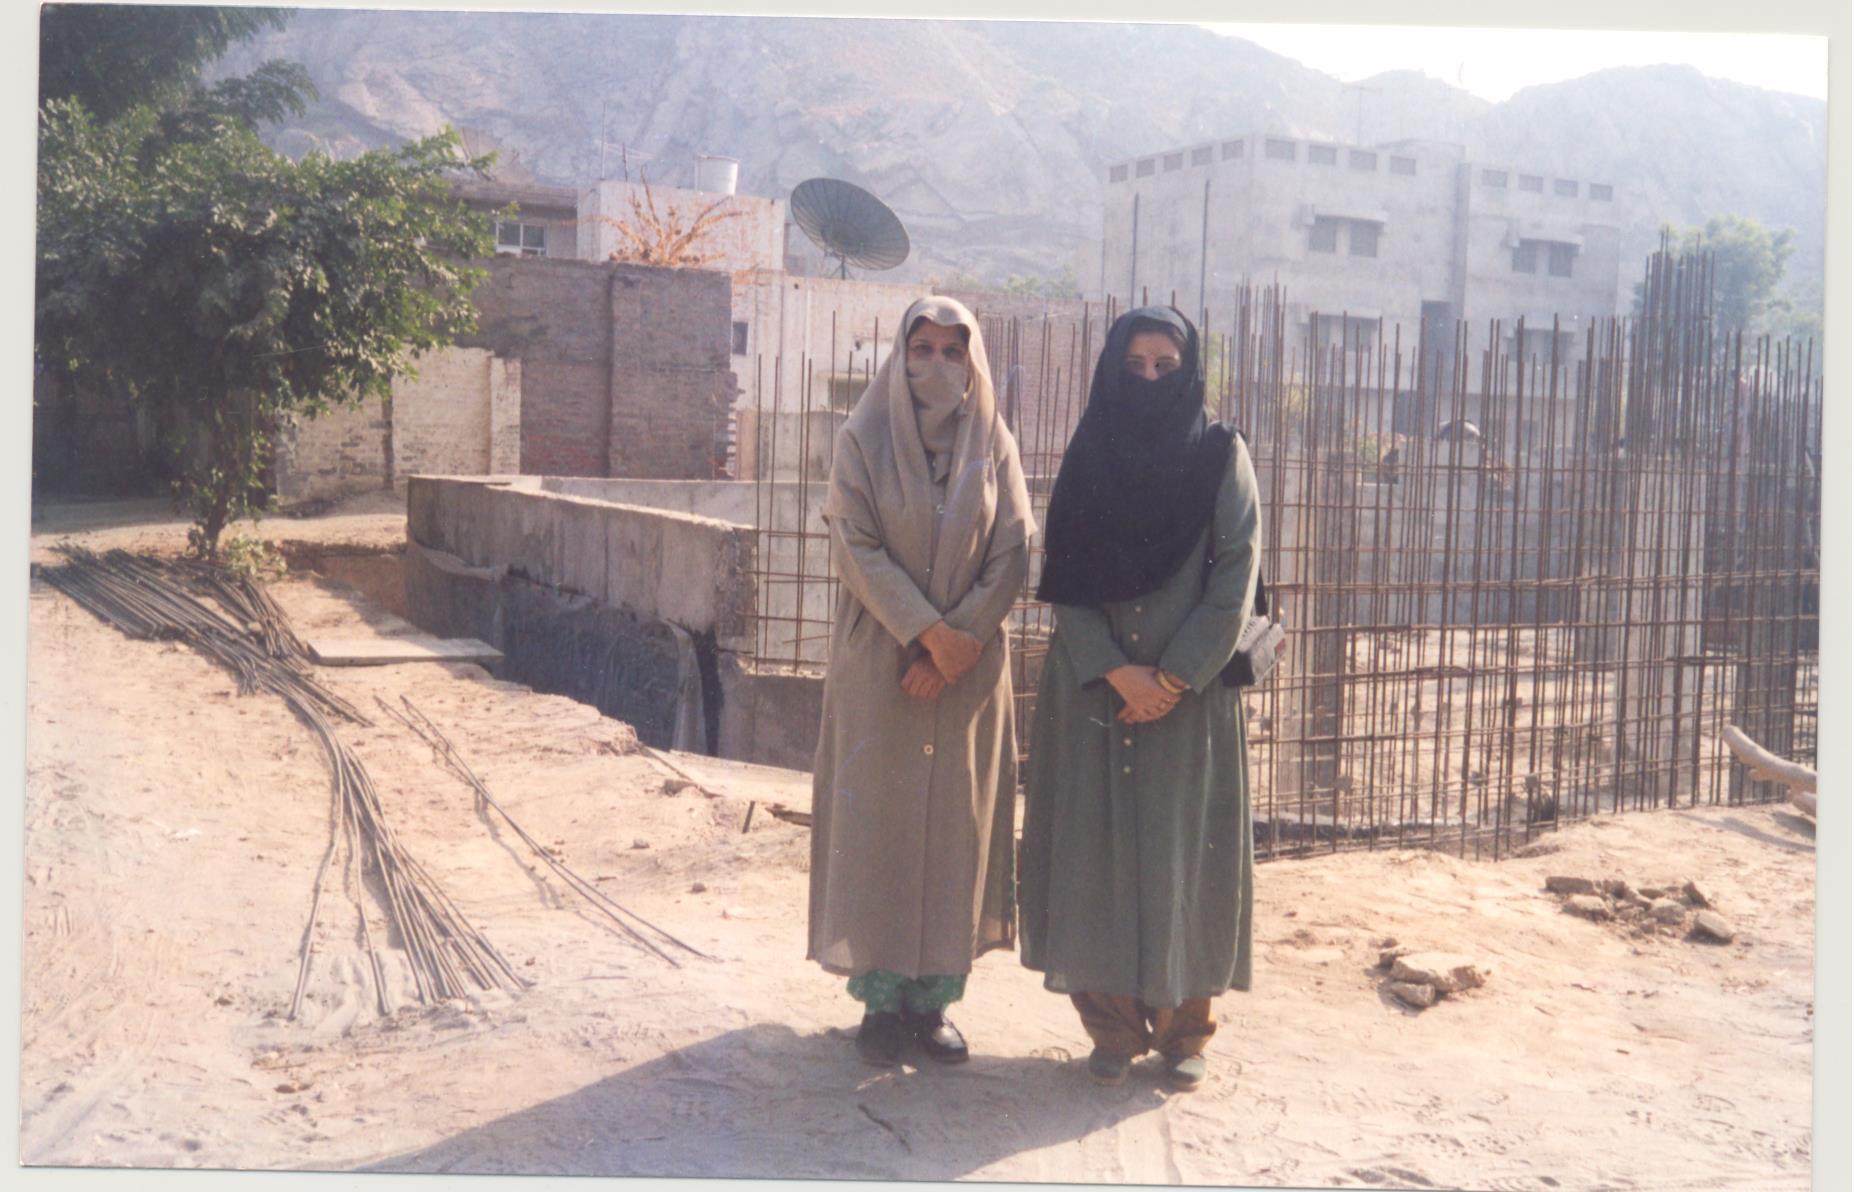 Courtesy of Dr. Nusrat Majoka, Rabwah, Pakistan. (Dr. Nusrat Jahan (left) and Dr. Amtul Haye (right) stand in front of the construction of the Begum Zubaida Bani gynecology wing of Fazl-e-Omer hospital in Rabwah, Pakistan, in 2002.)